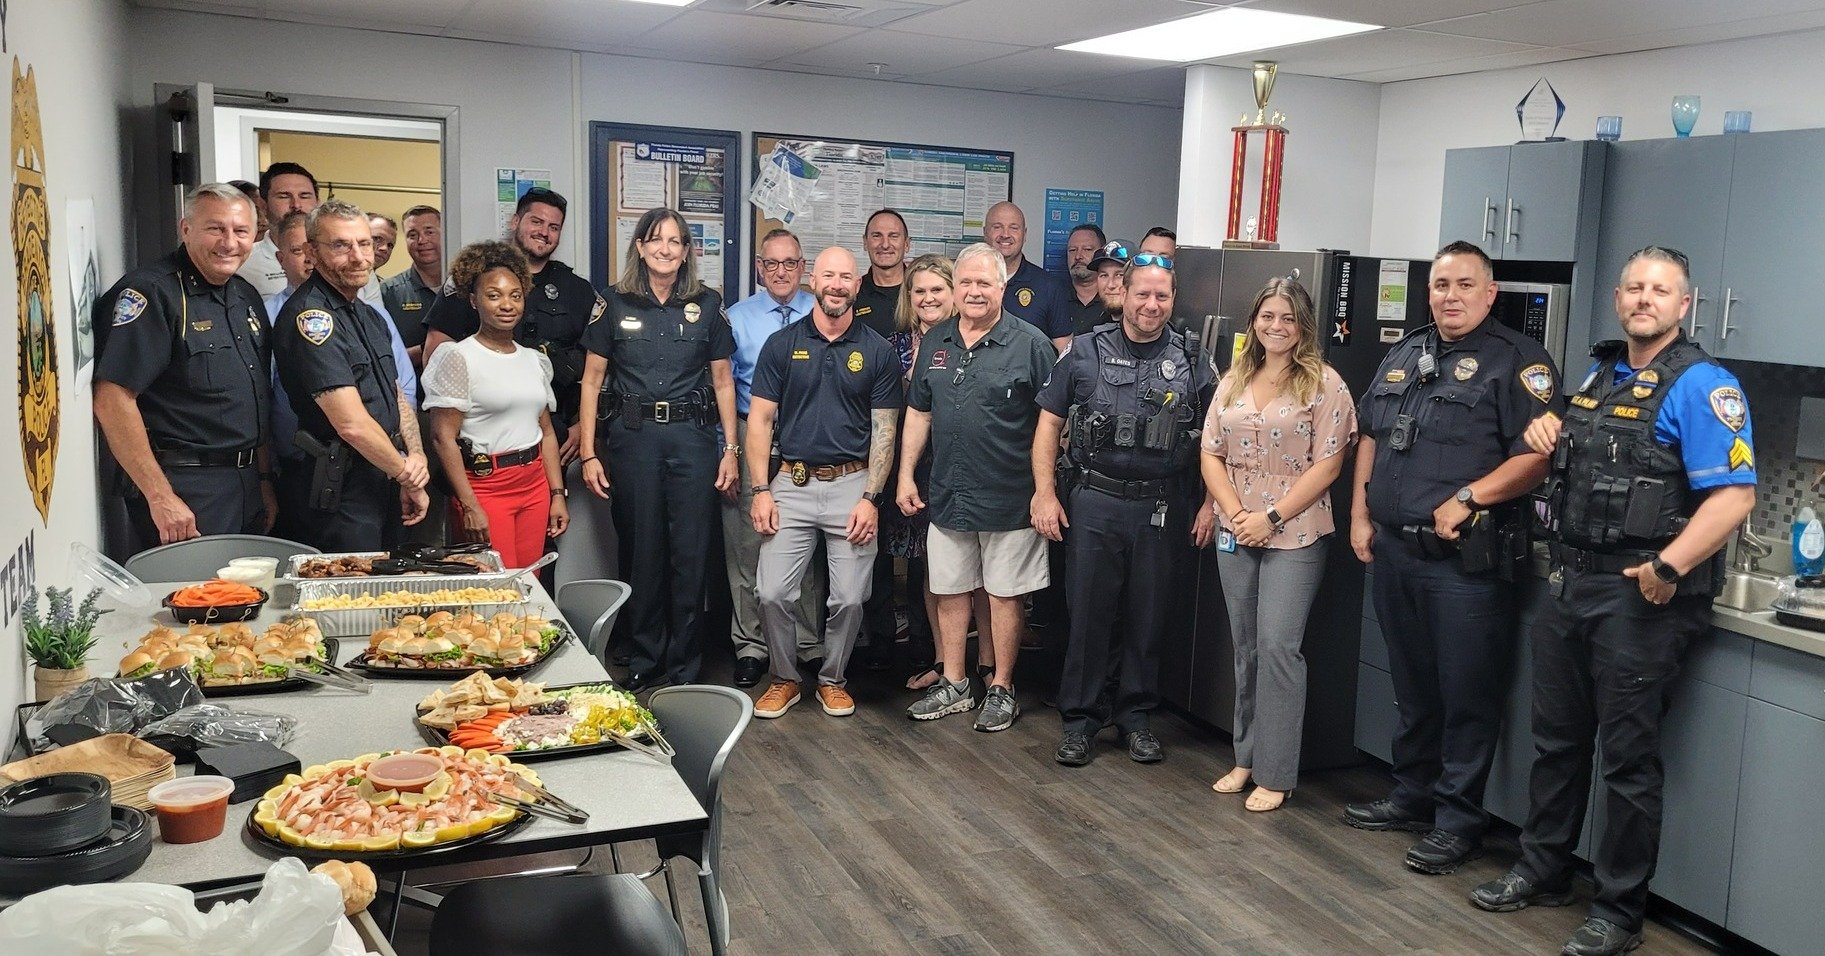 Thank you to O'Bricks for surprising our officers with an amazing spread to kick off #NationalPoliceWeek! We are grateful for the support of so many businesses in Bradenton - not just during Police Week, but year-round!